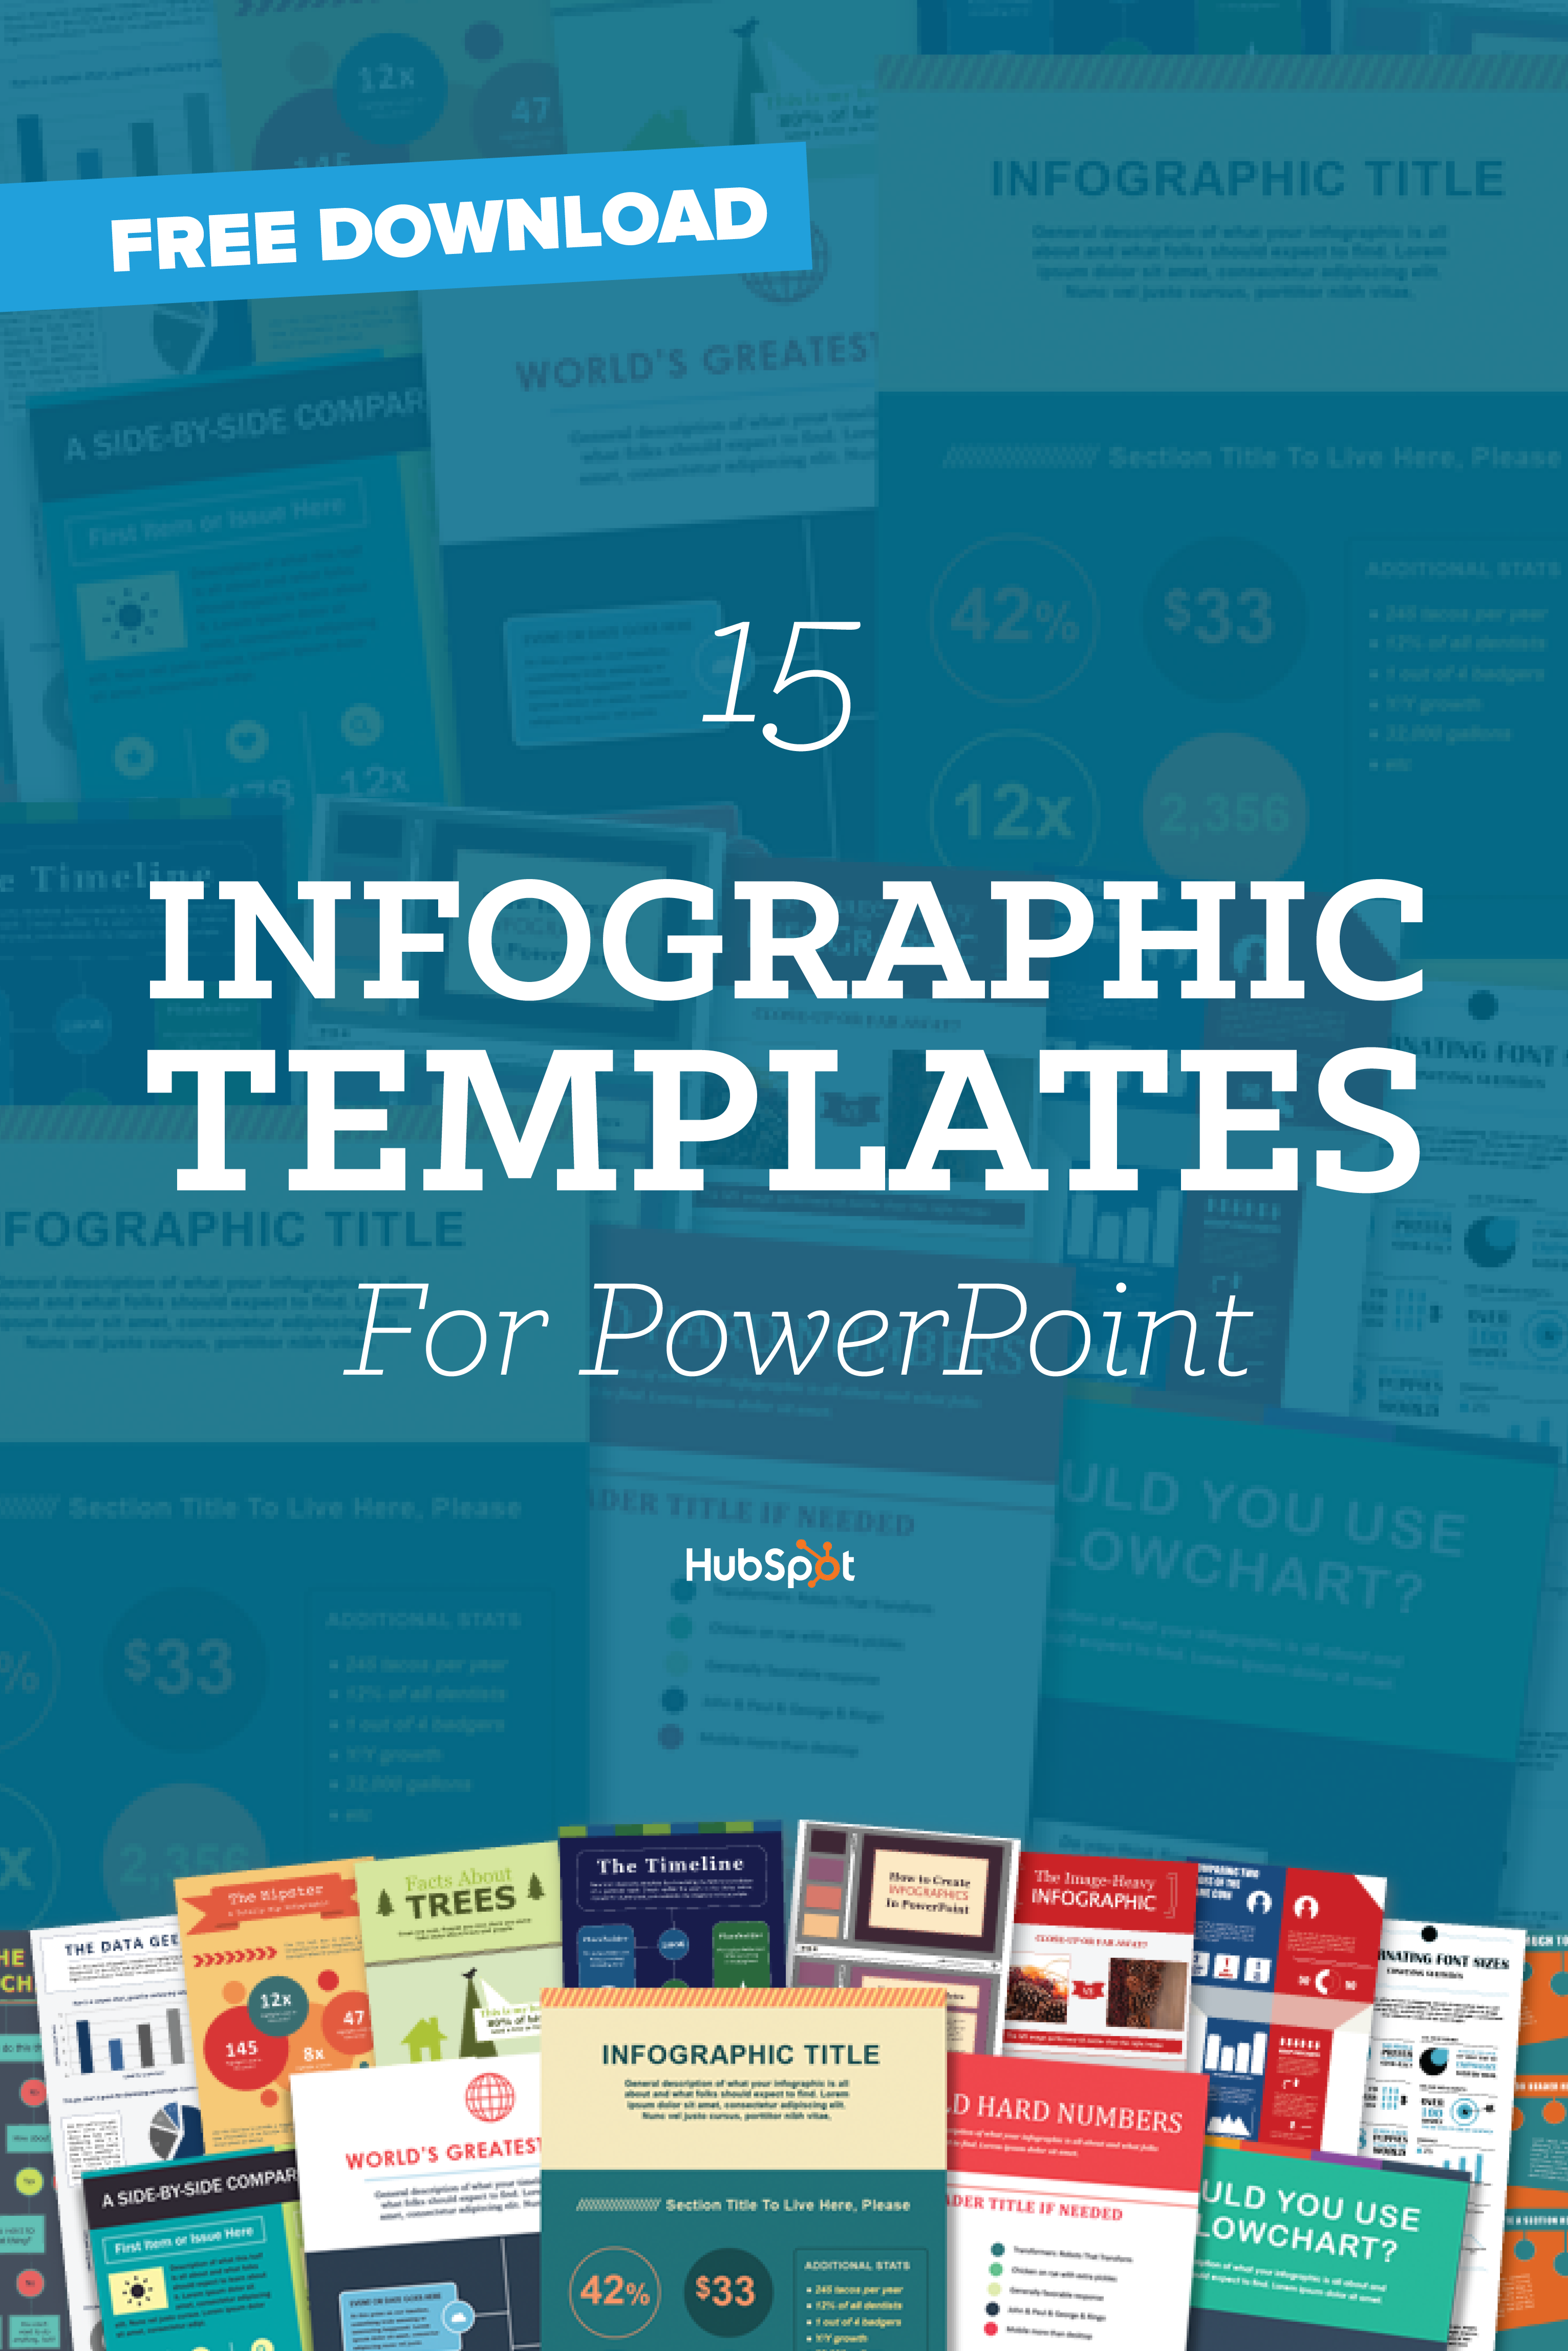 free infographic template for survey powerpoint